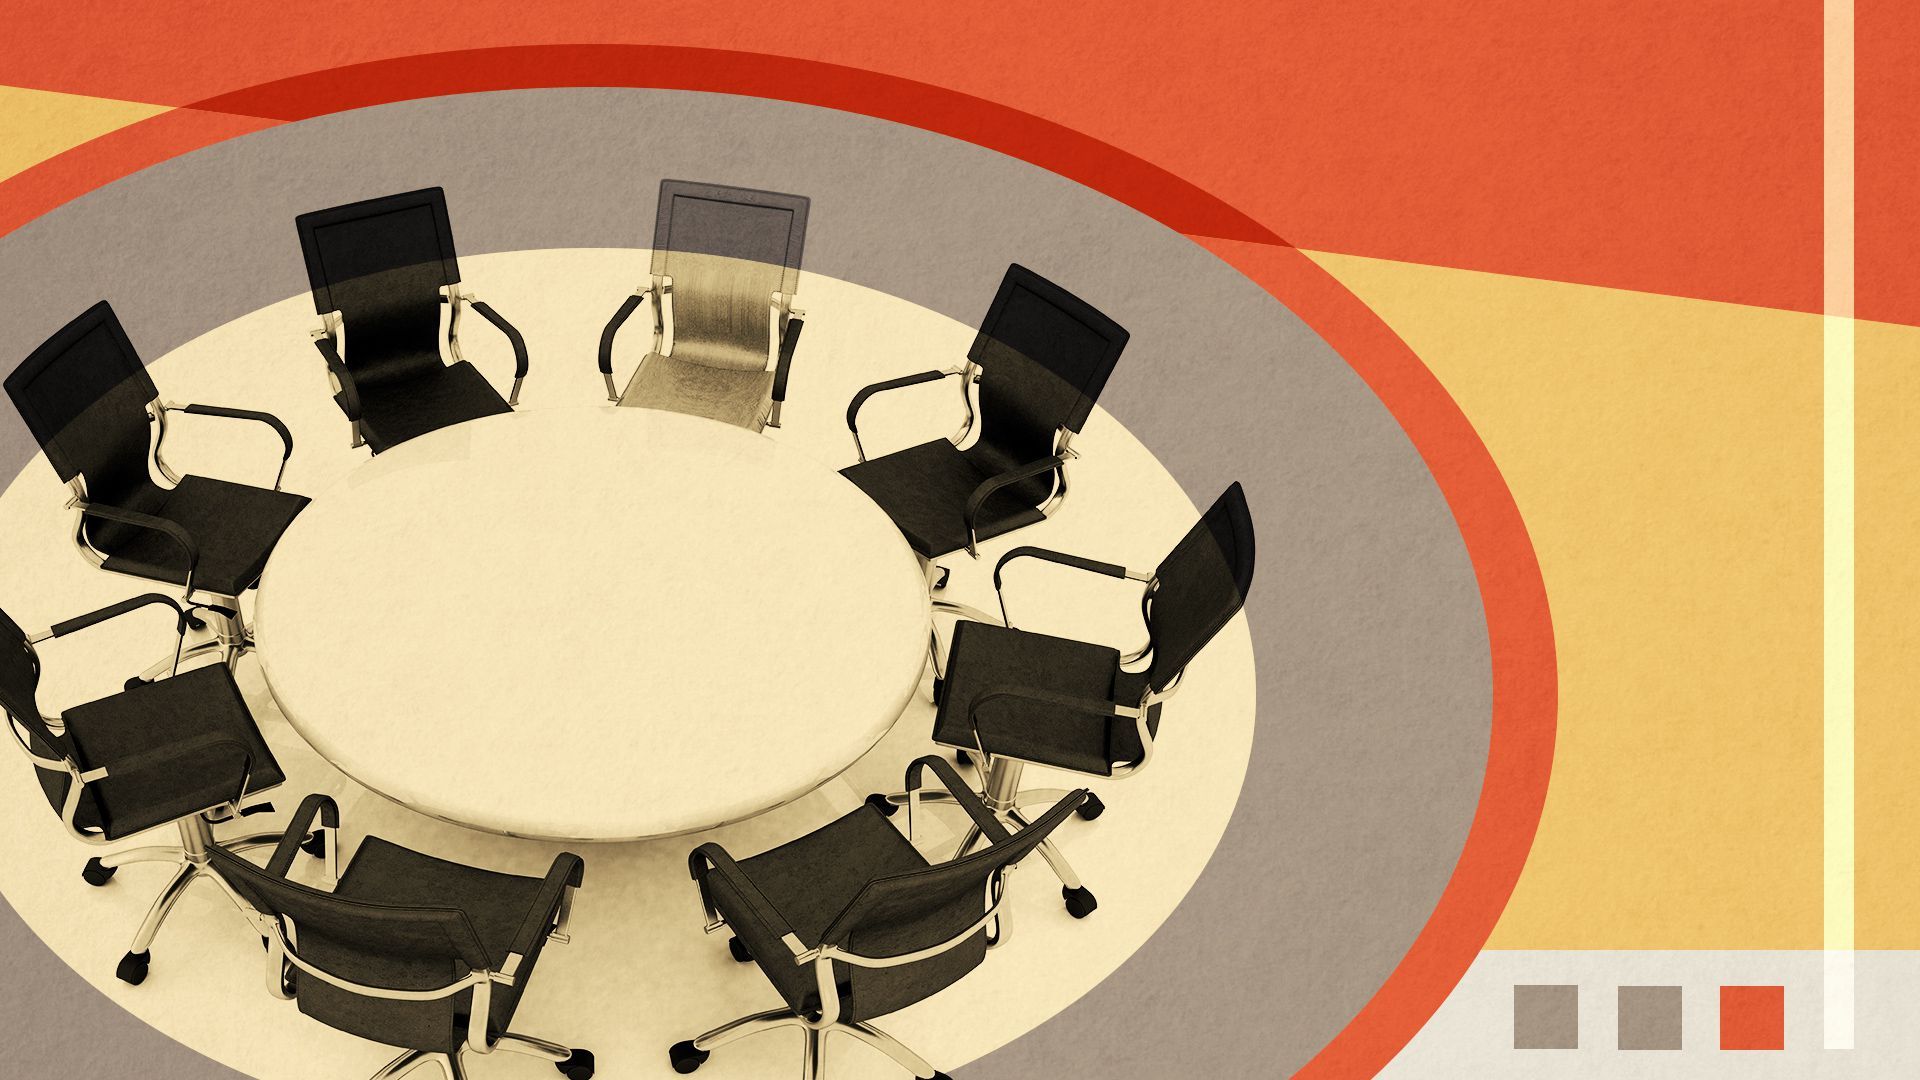 Illustration of a board room table with 8 chairs, one of them a different color, surrounded by abstract shapes.